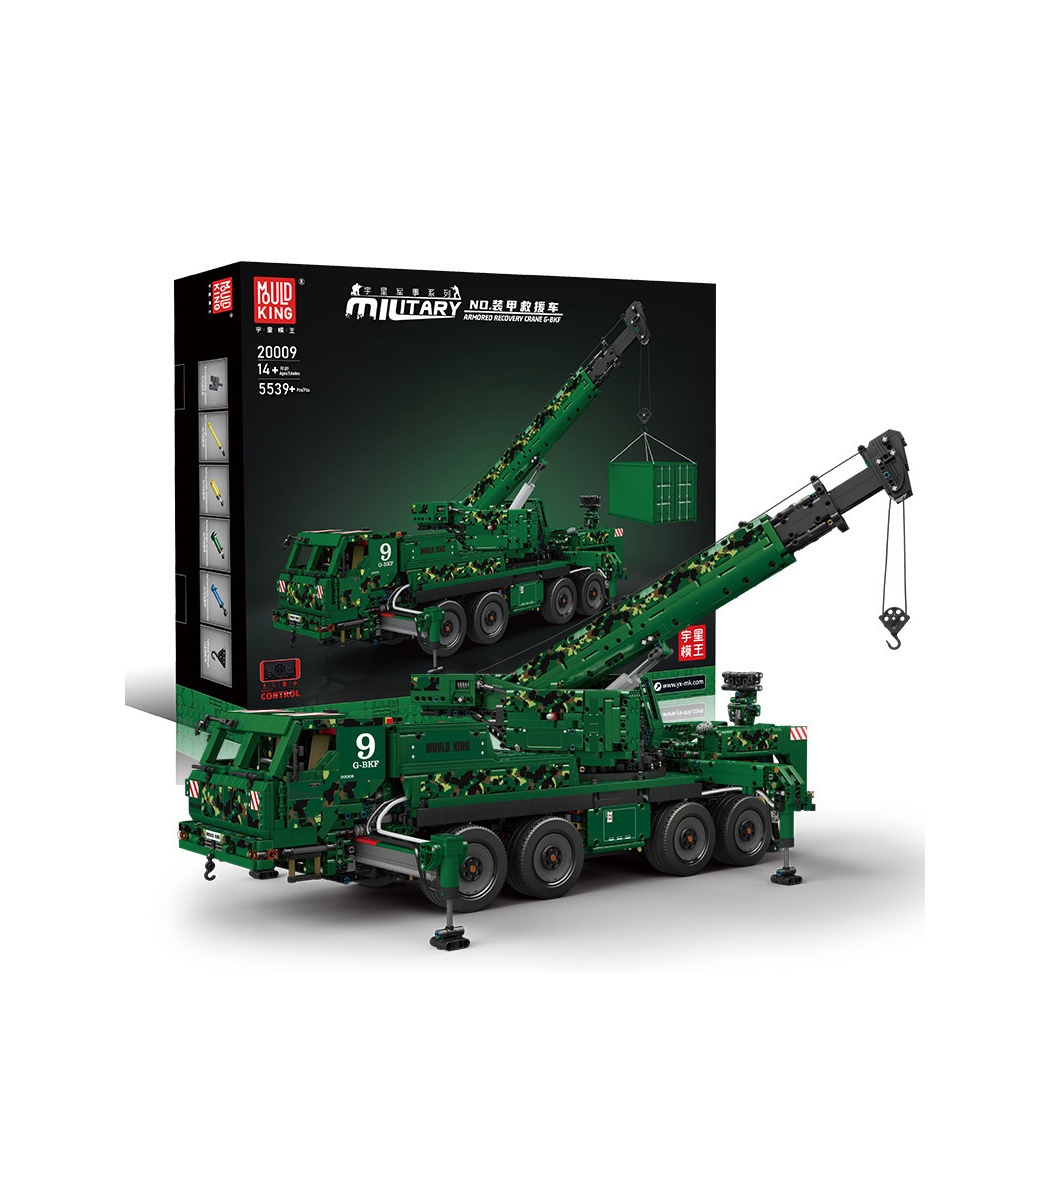 https://www.buildingtoystore.com/14499-superlarge_default/mould-king-20009-armored-recovery-crane-g-bkf-military-series-remote-control-building-blocks-toy-set.jpg